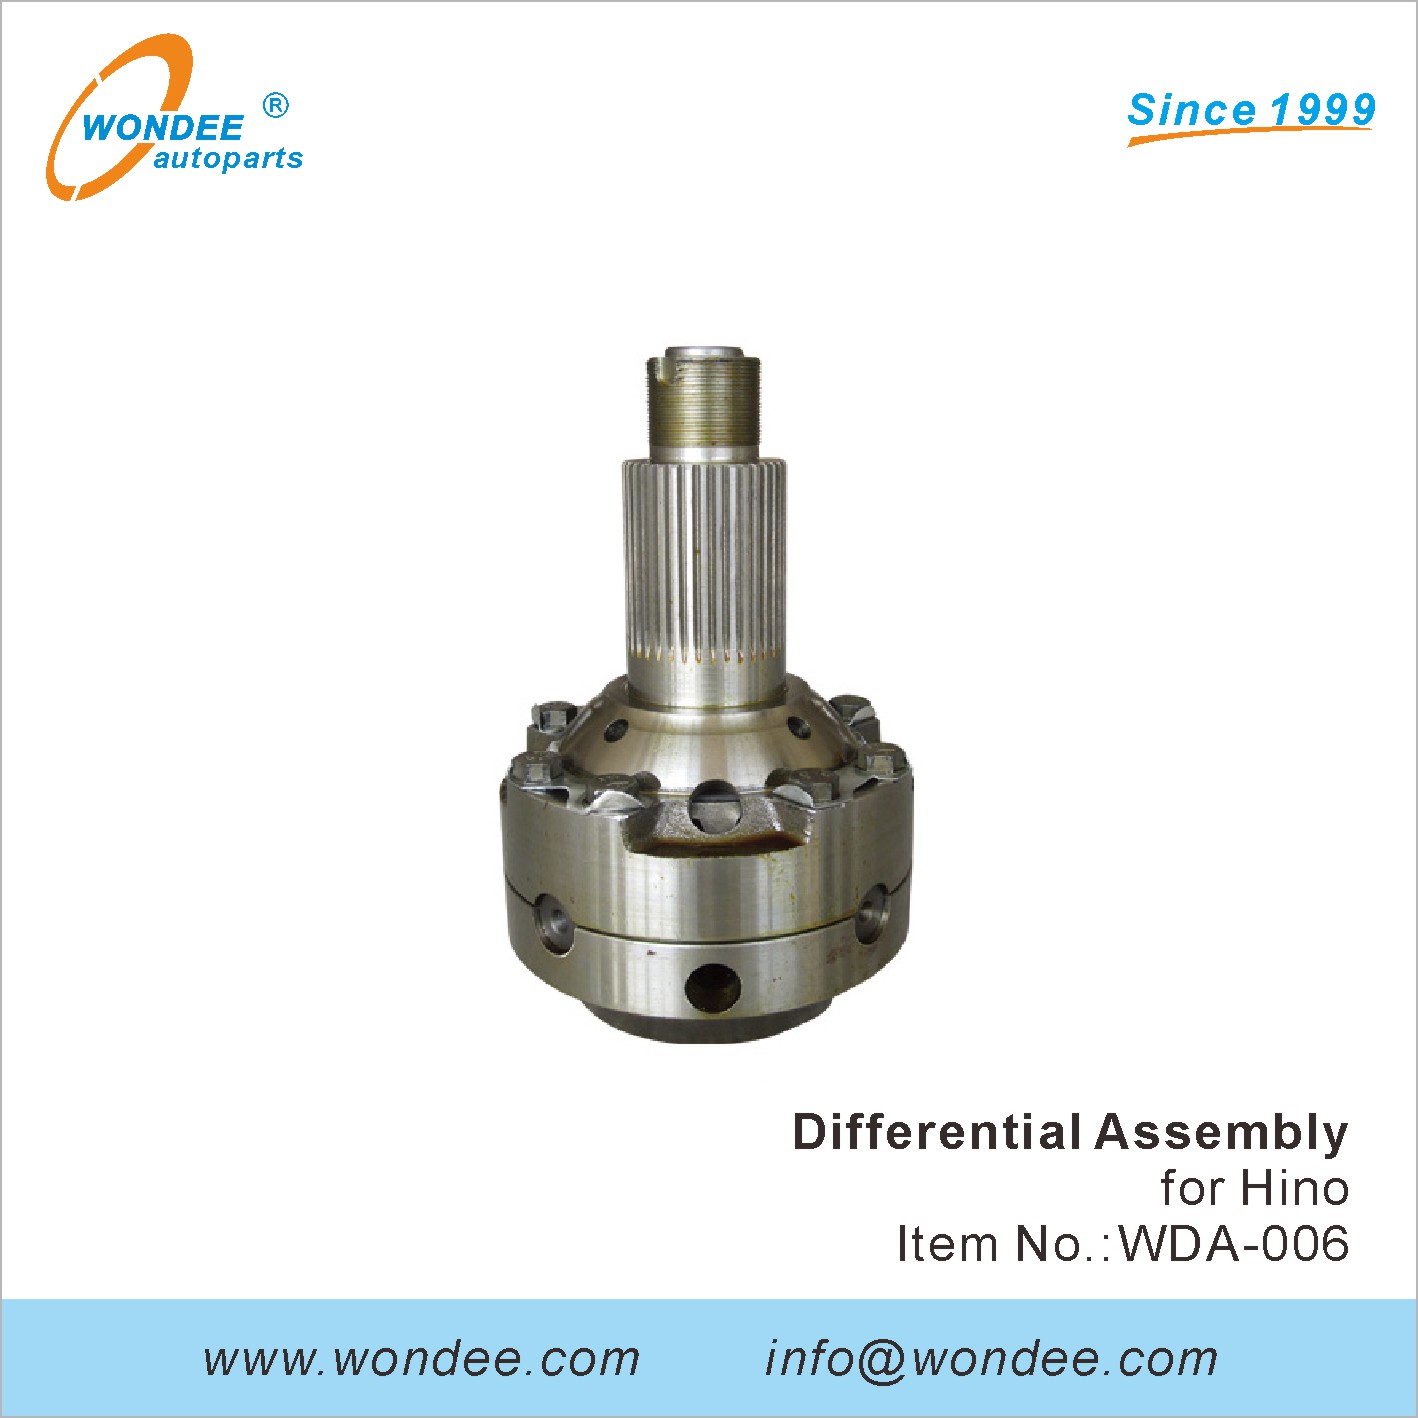 WONDEE differential assembly (6)